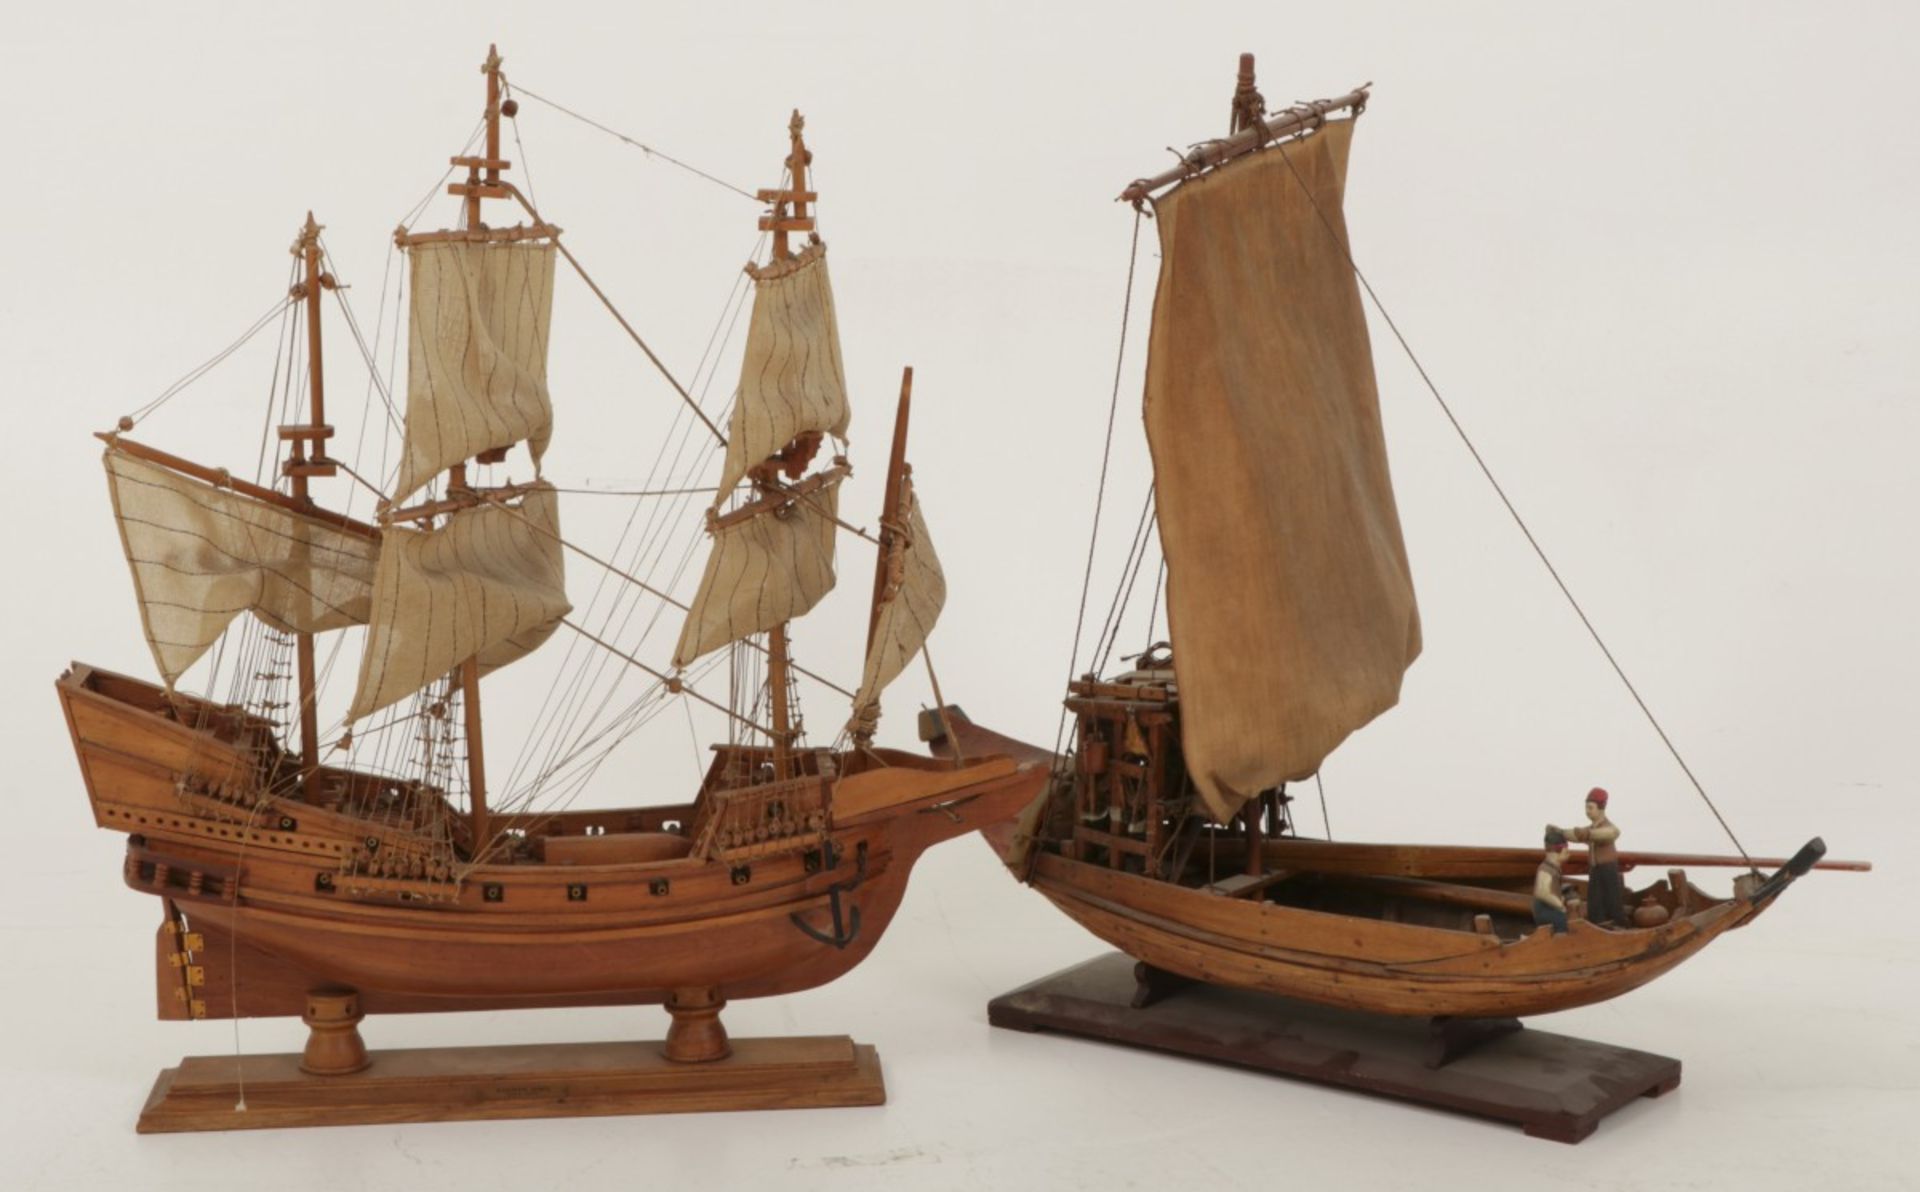 A model ship "The Gold Hind", England, together with another model ship, 20th century.